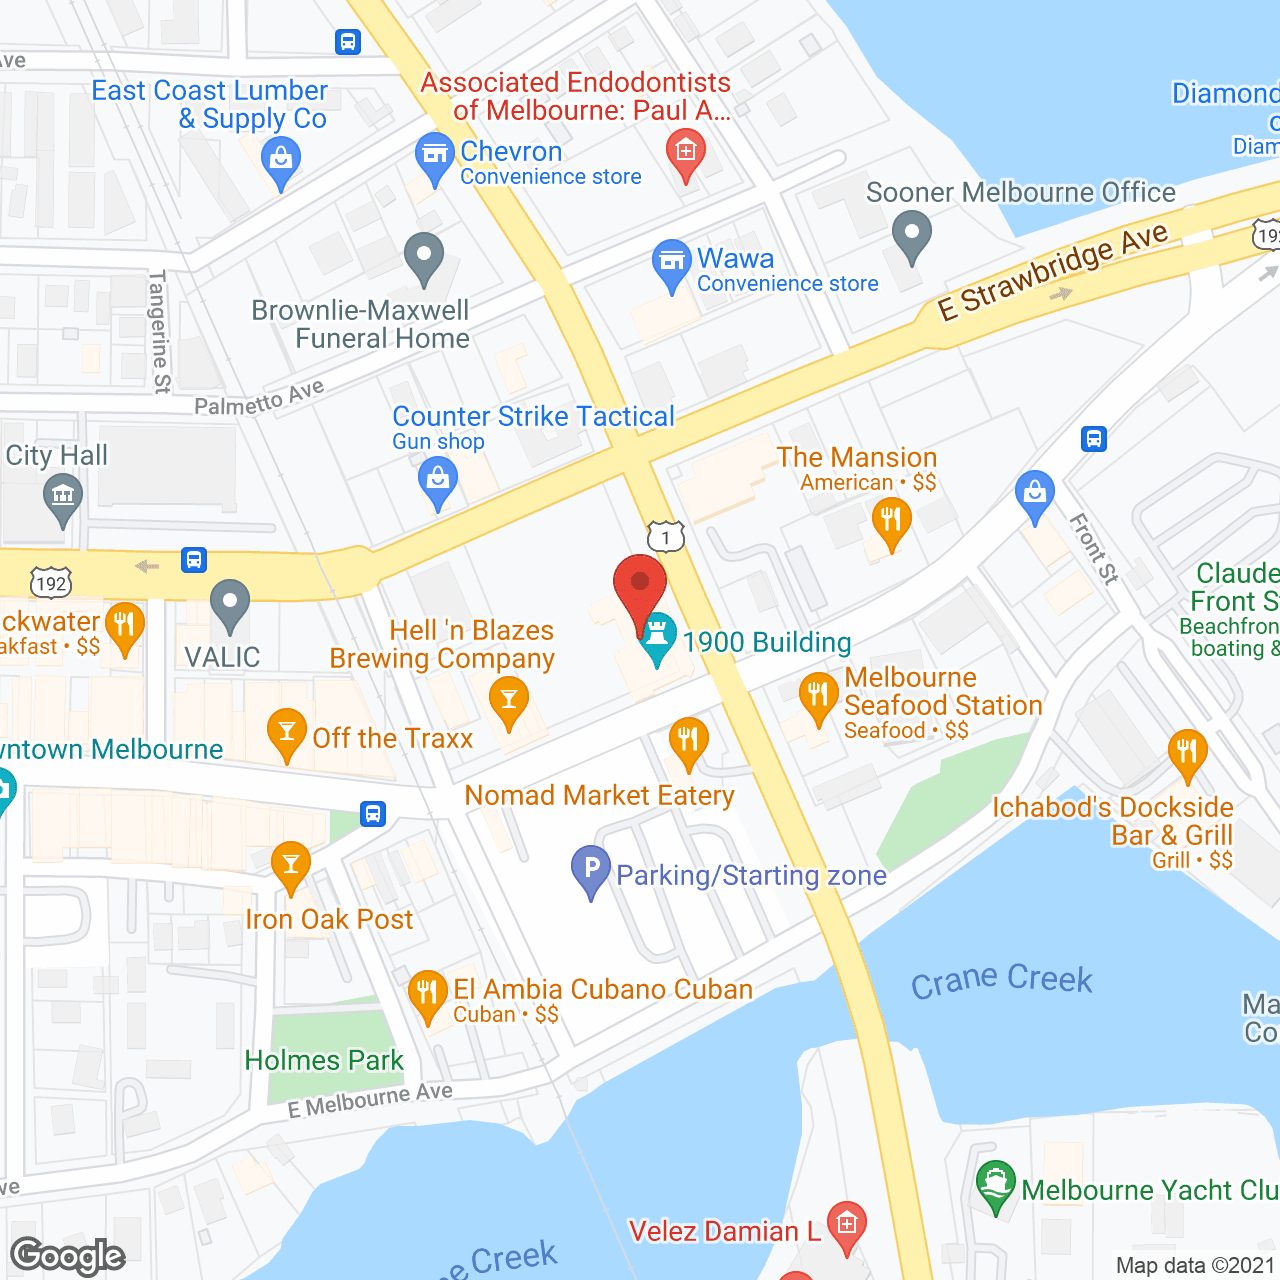 American In-Home Care - Melbourne in google map